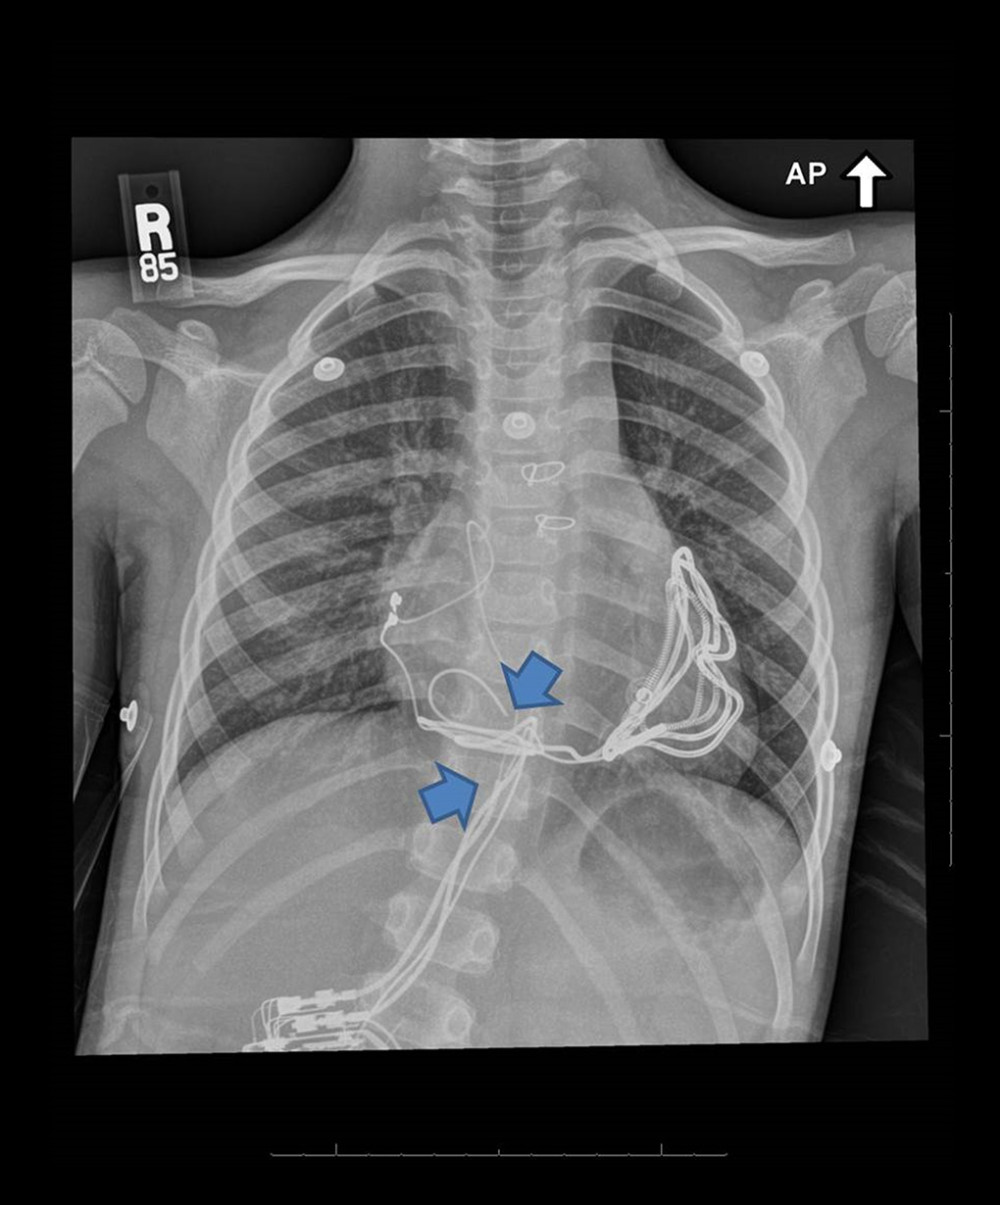 Anterior-posterior radiograph illustrating the fractured leads of the automatic implantable cardioverterdefibrillator (arrows).